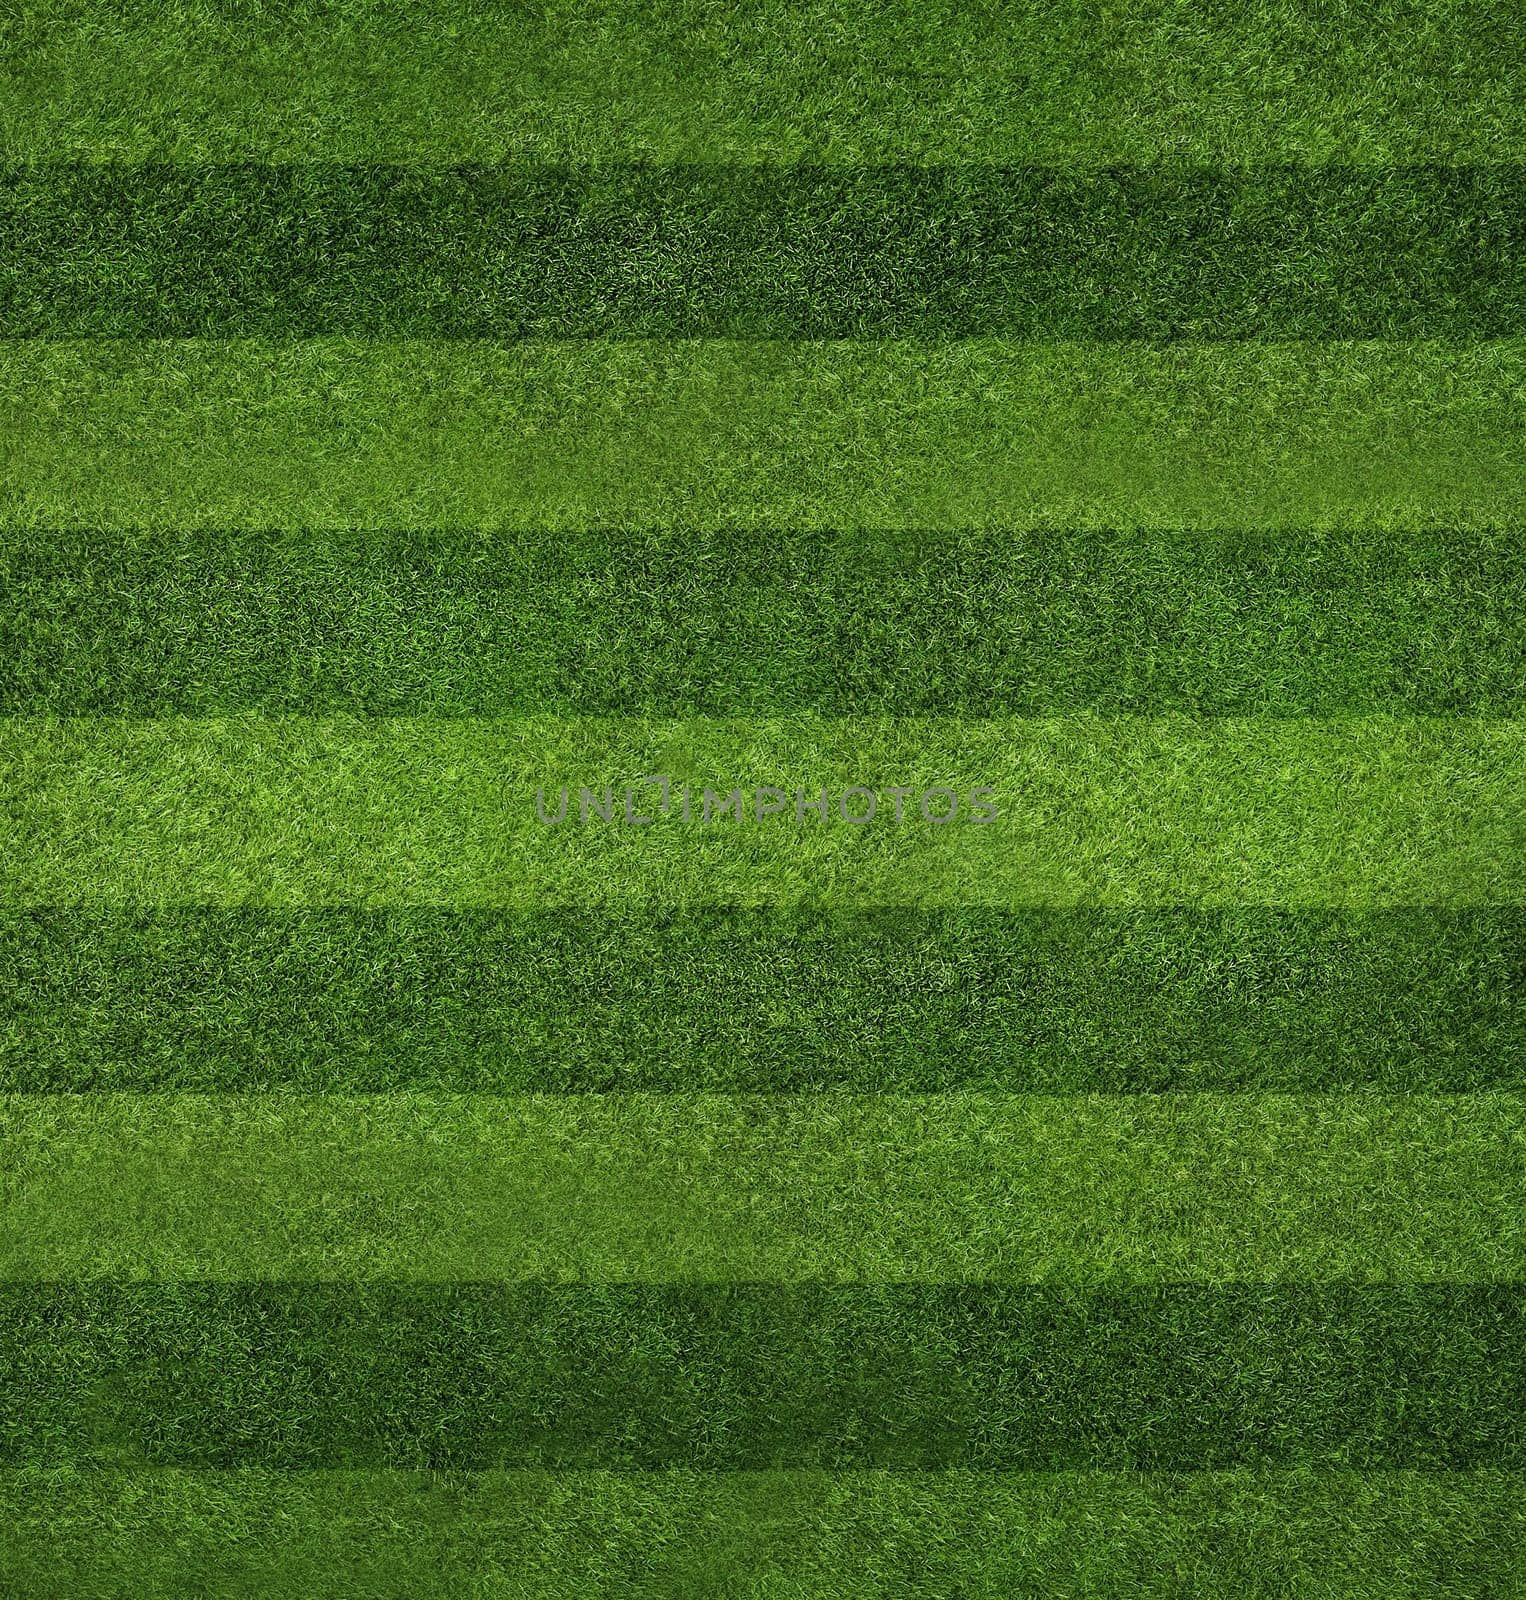 Background image of a short-cropped green striped grass close-up view from above